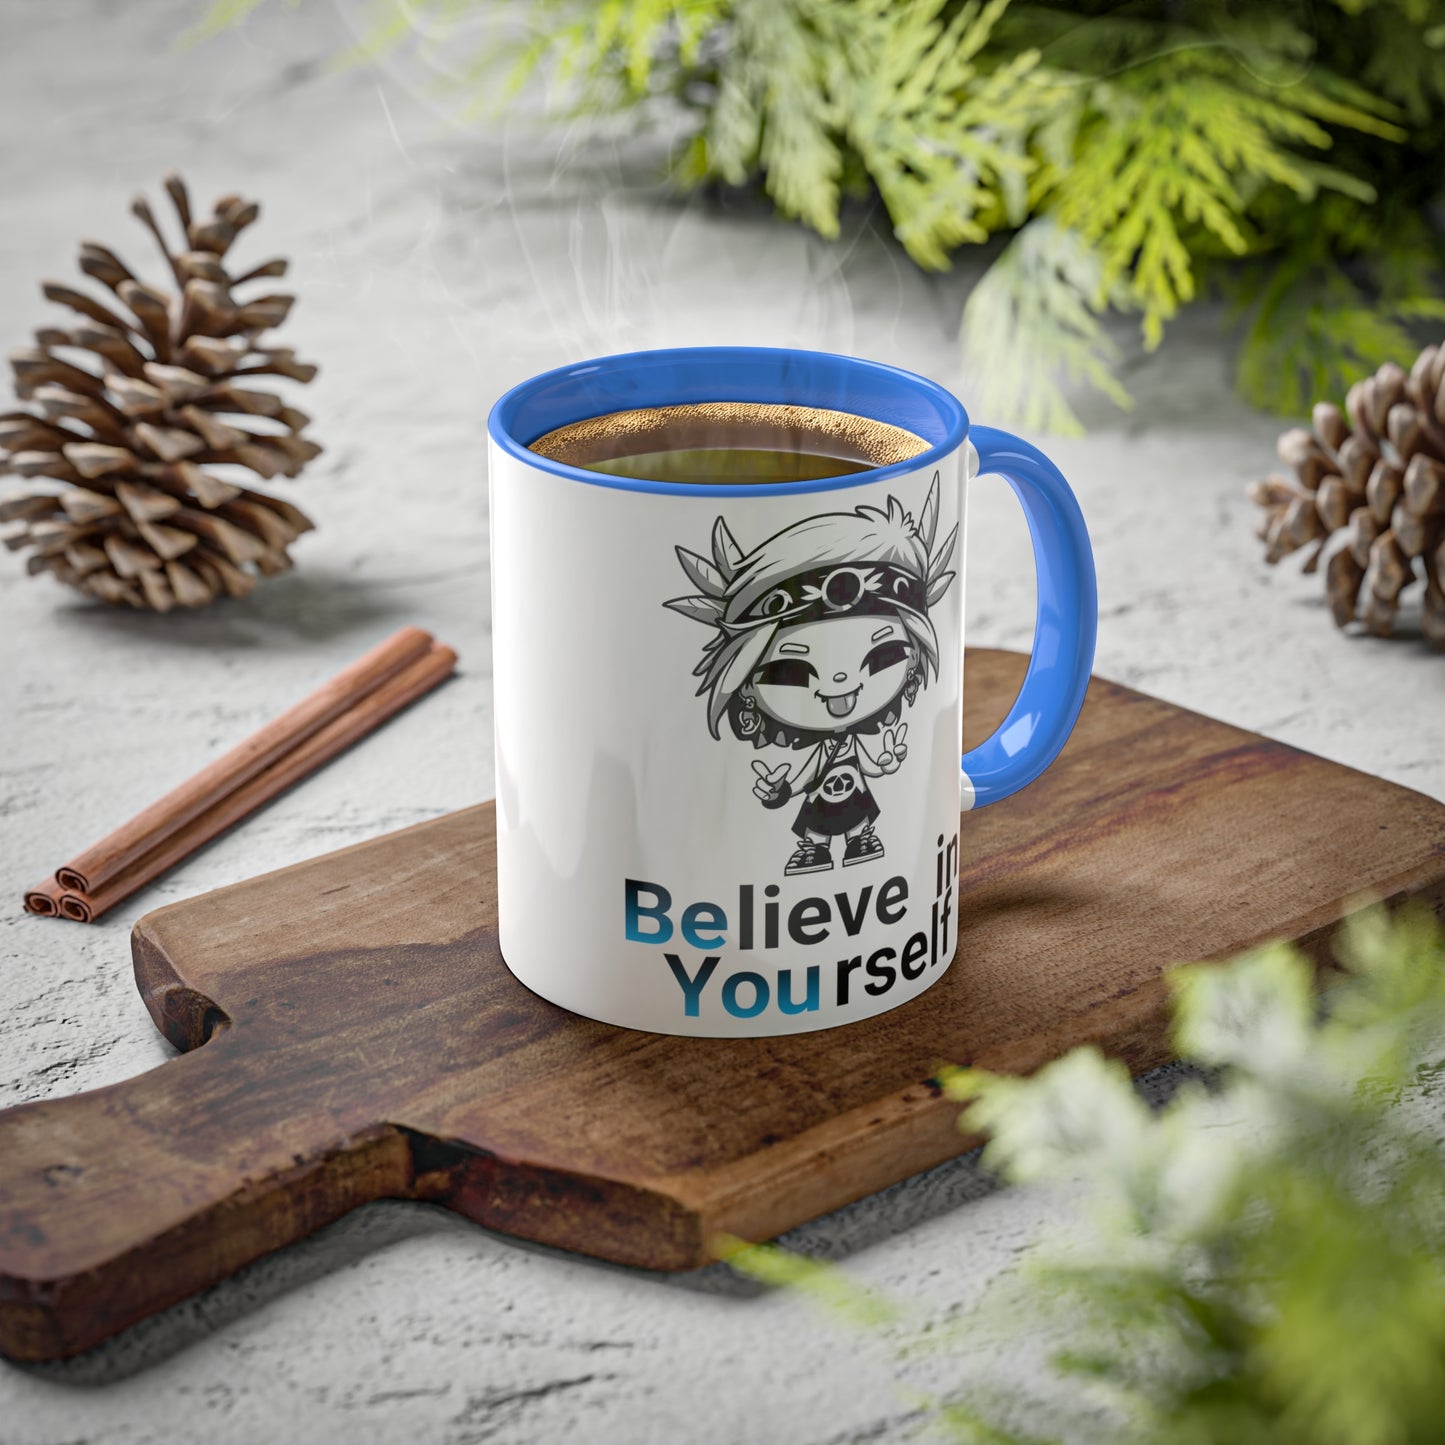 Colorful Mugs, 11oz, Believe in yourself chibi